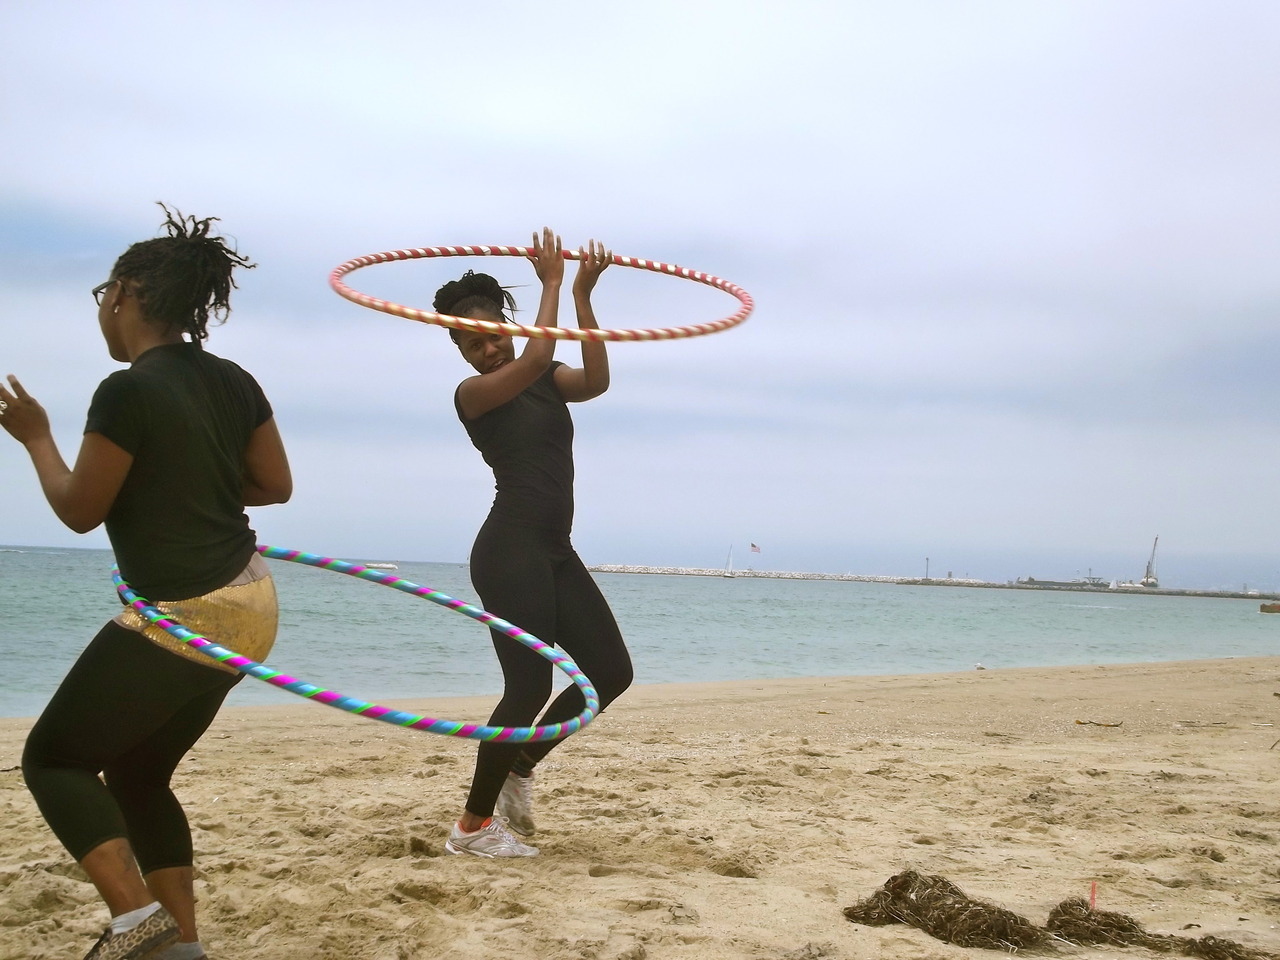 so instead of going to the gym, my sister and i went to the beach and hooped for